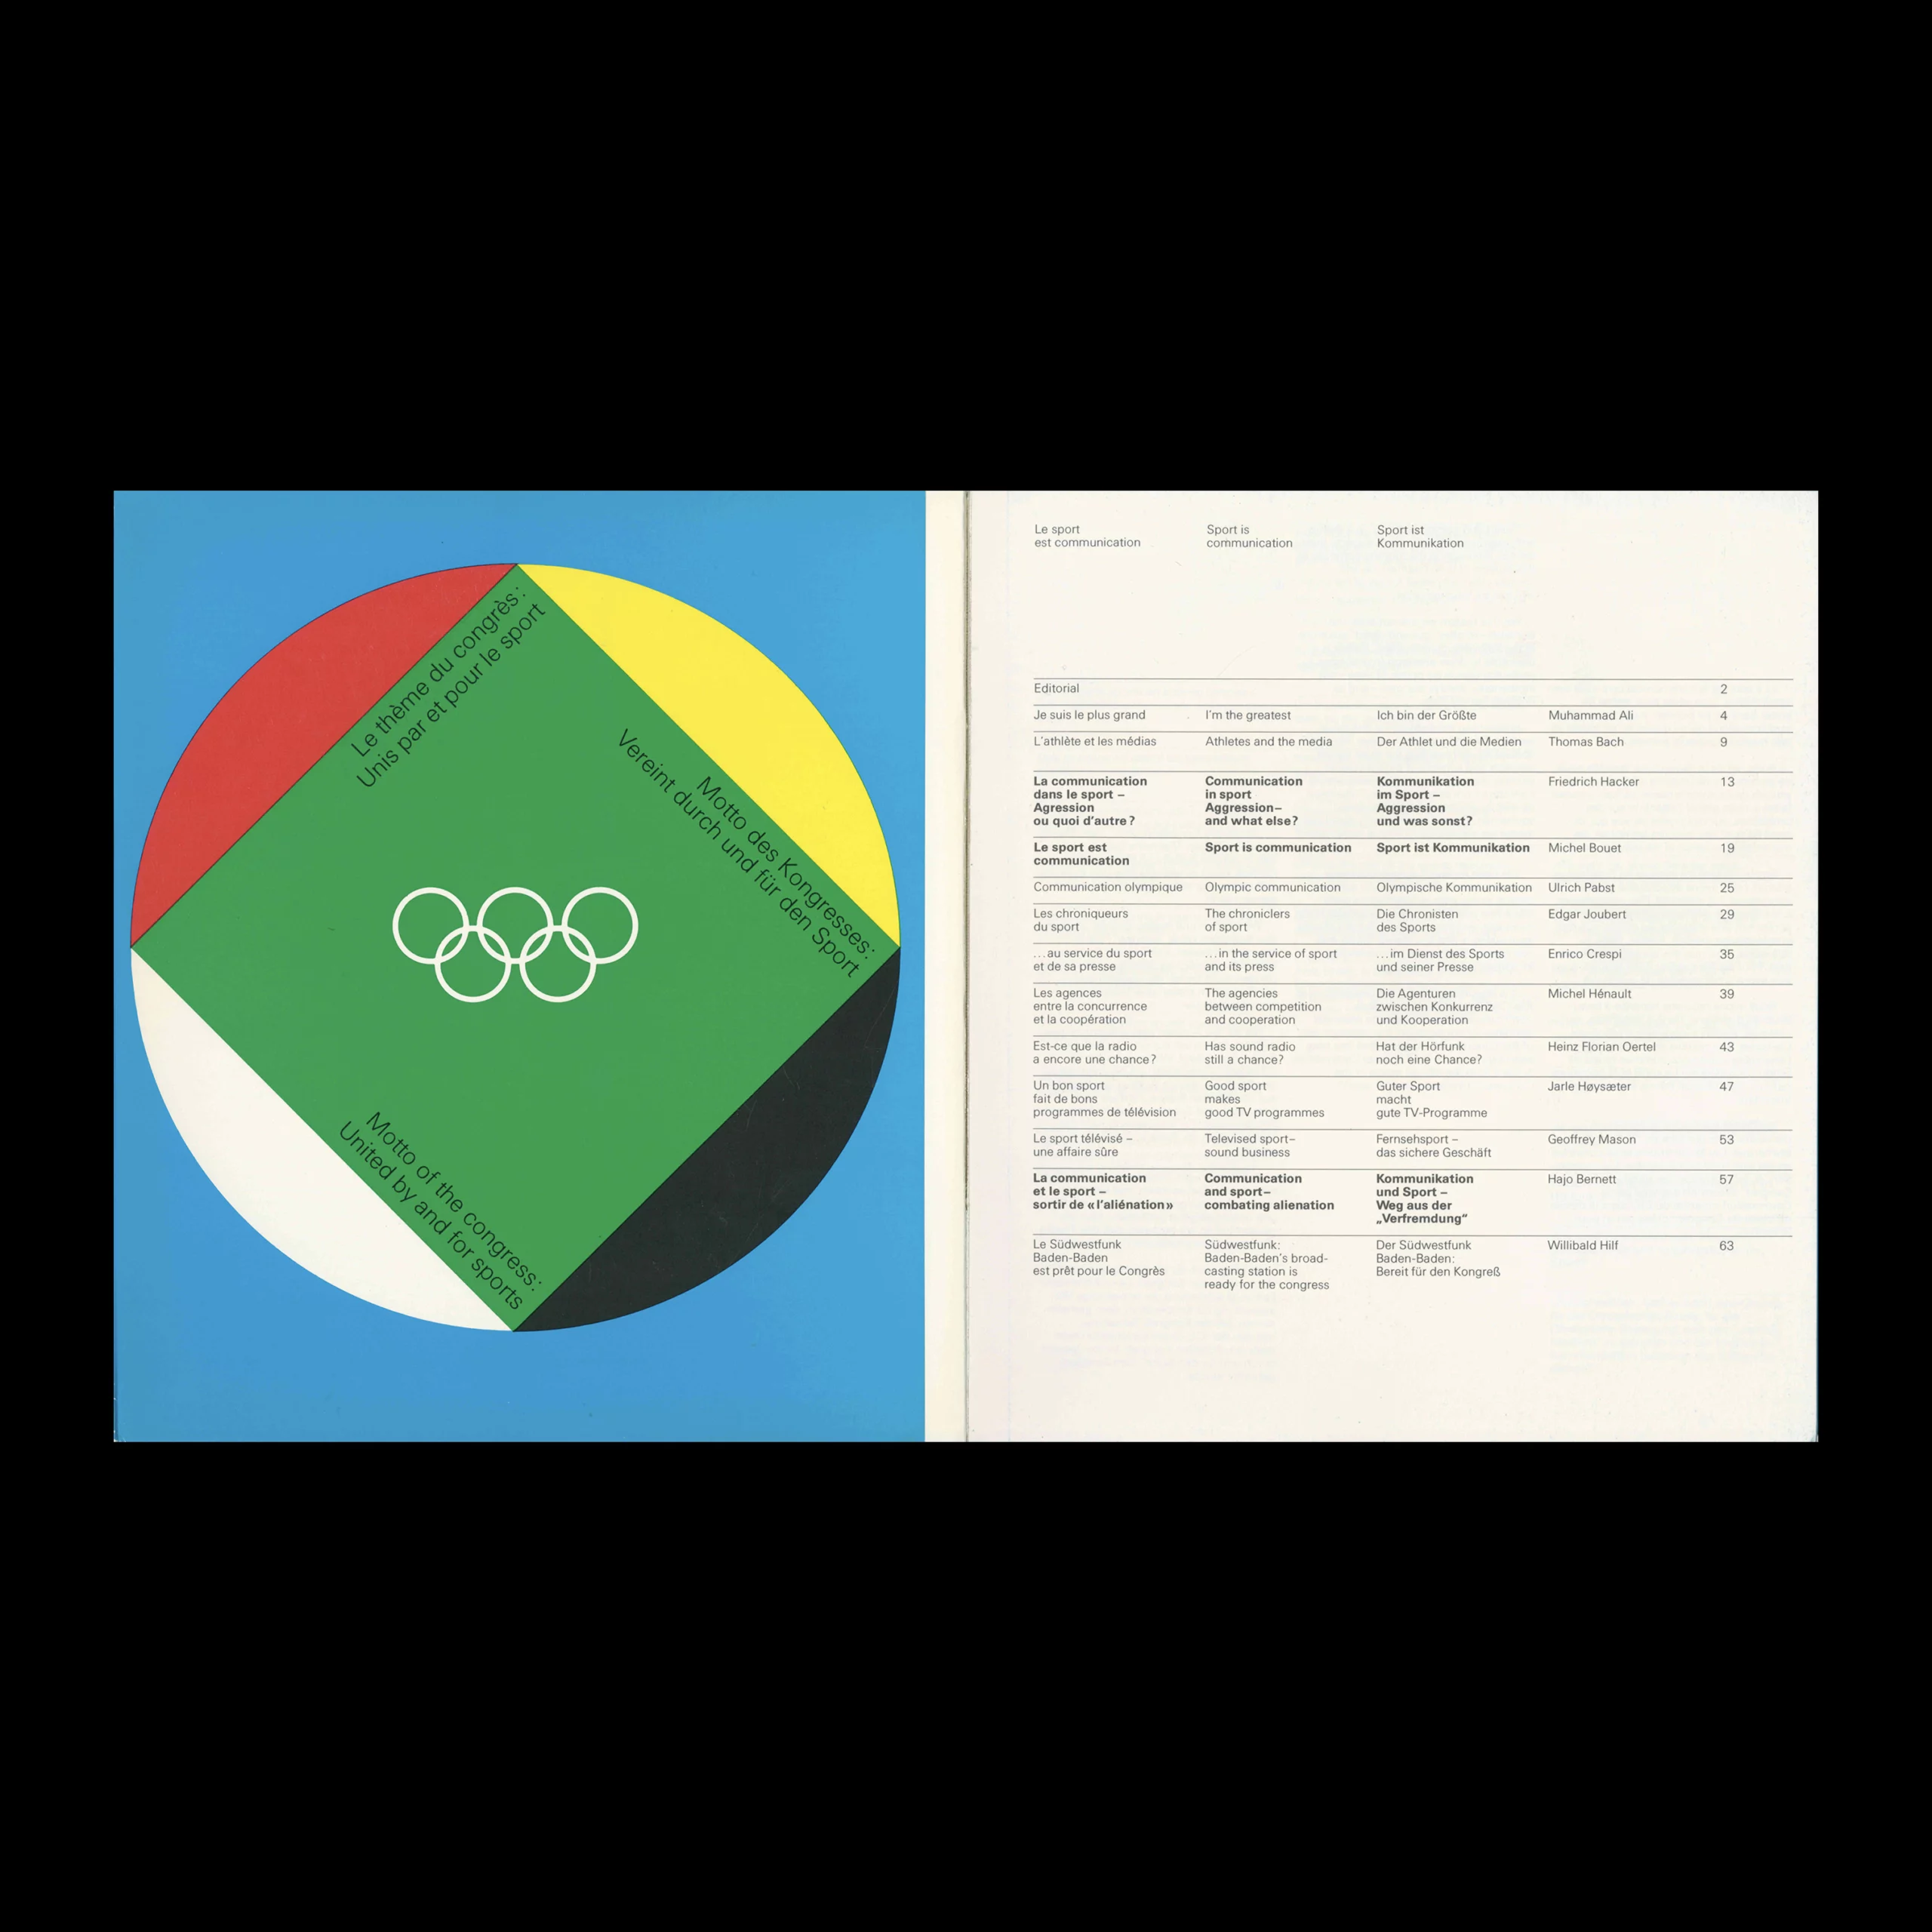 Bulletin 3, 11th Olympic Congress, Sport is Communication, 1981. Designed by Büro Rolf Müller